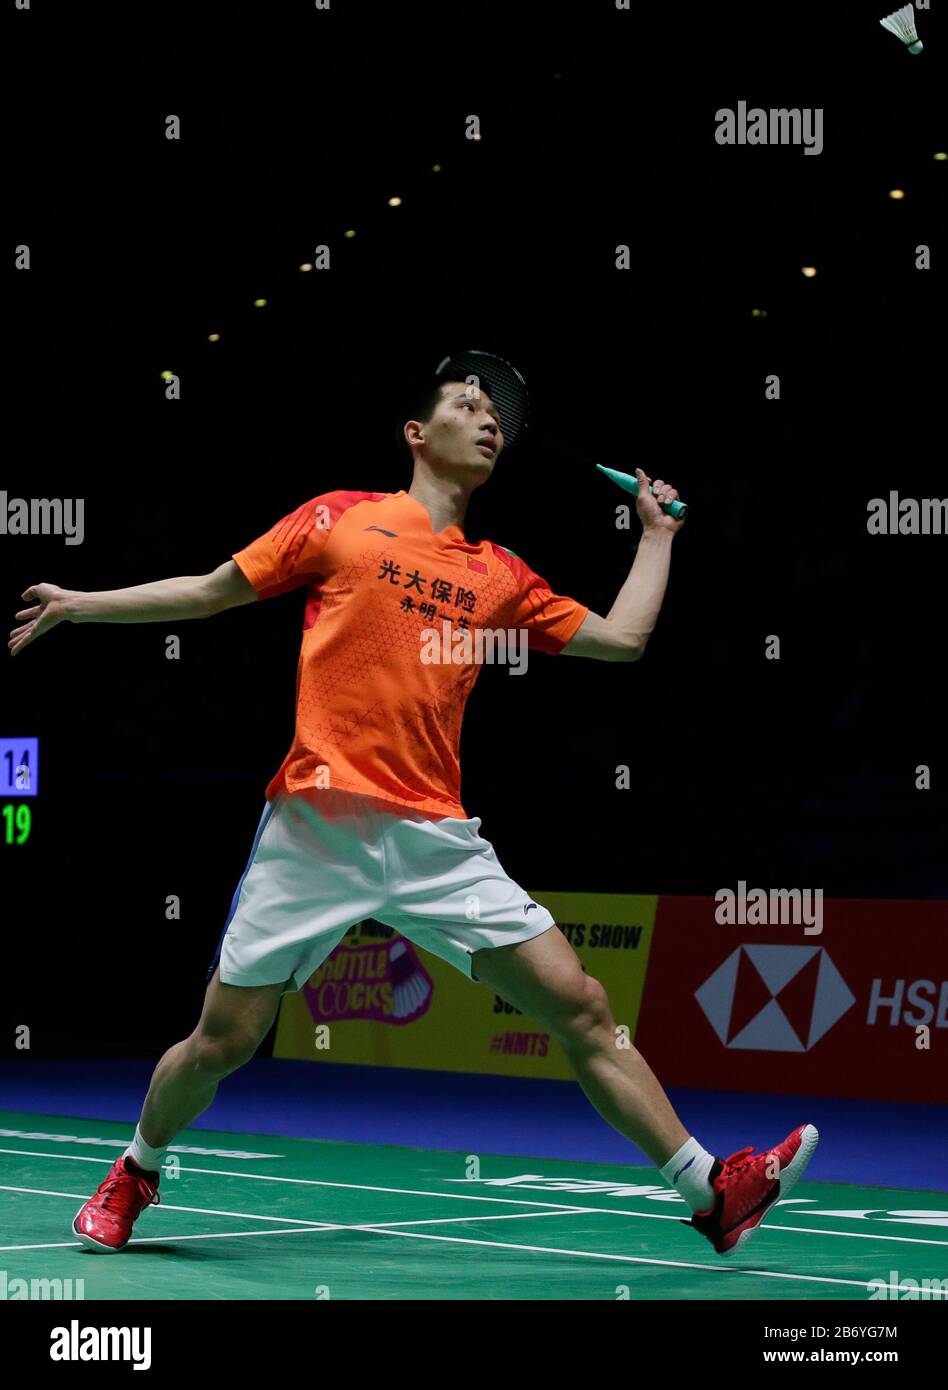 (200312) -- BIRMINGHAM, March 12, 2020 (Xinhua) -- China's Zhao Junpeng competes during the men's singles second round match with China's Shi Yuqi at the All England Open Badminton Championships in Birmingham, Britain, on March 12, 2020. (Photo by Tim Ireland/Xinhua) Stock Photo